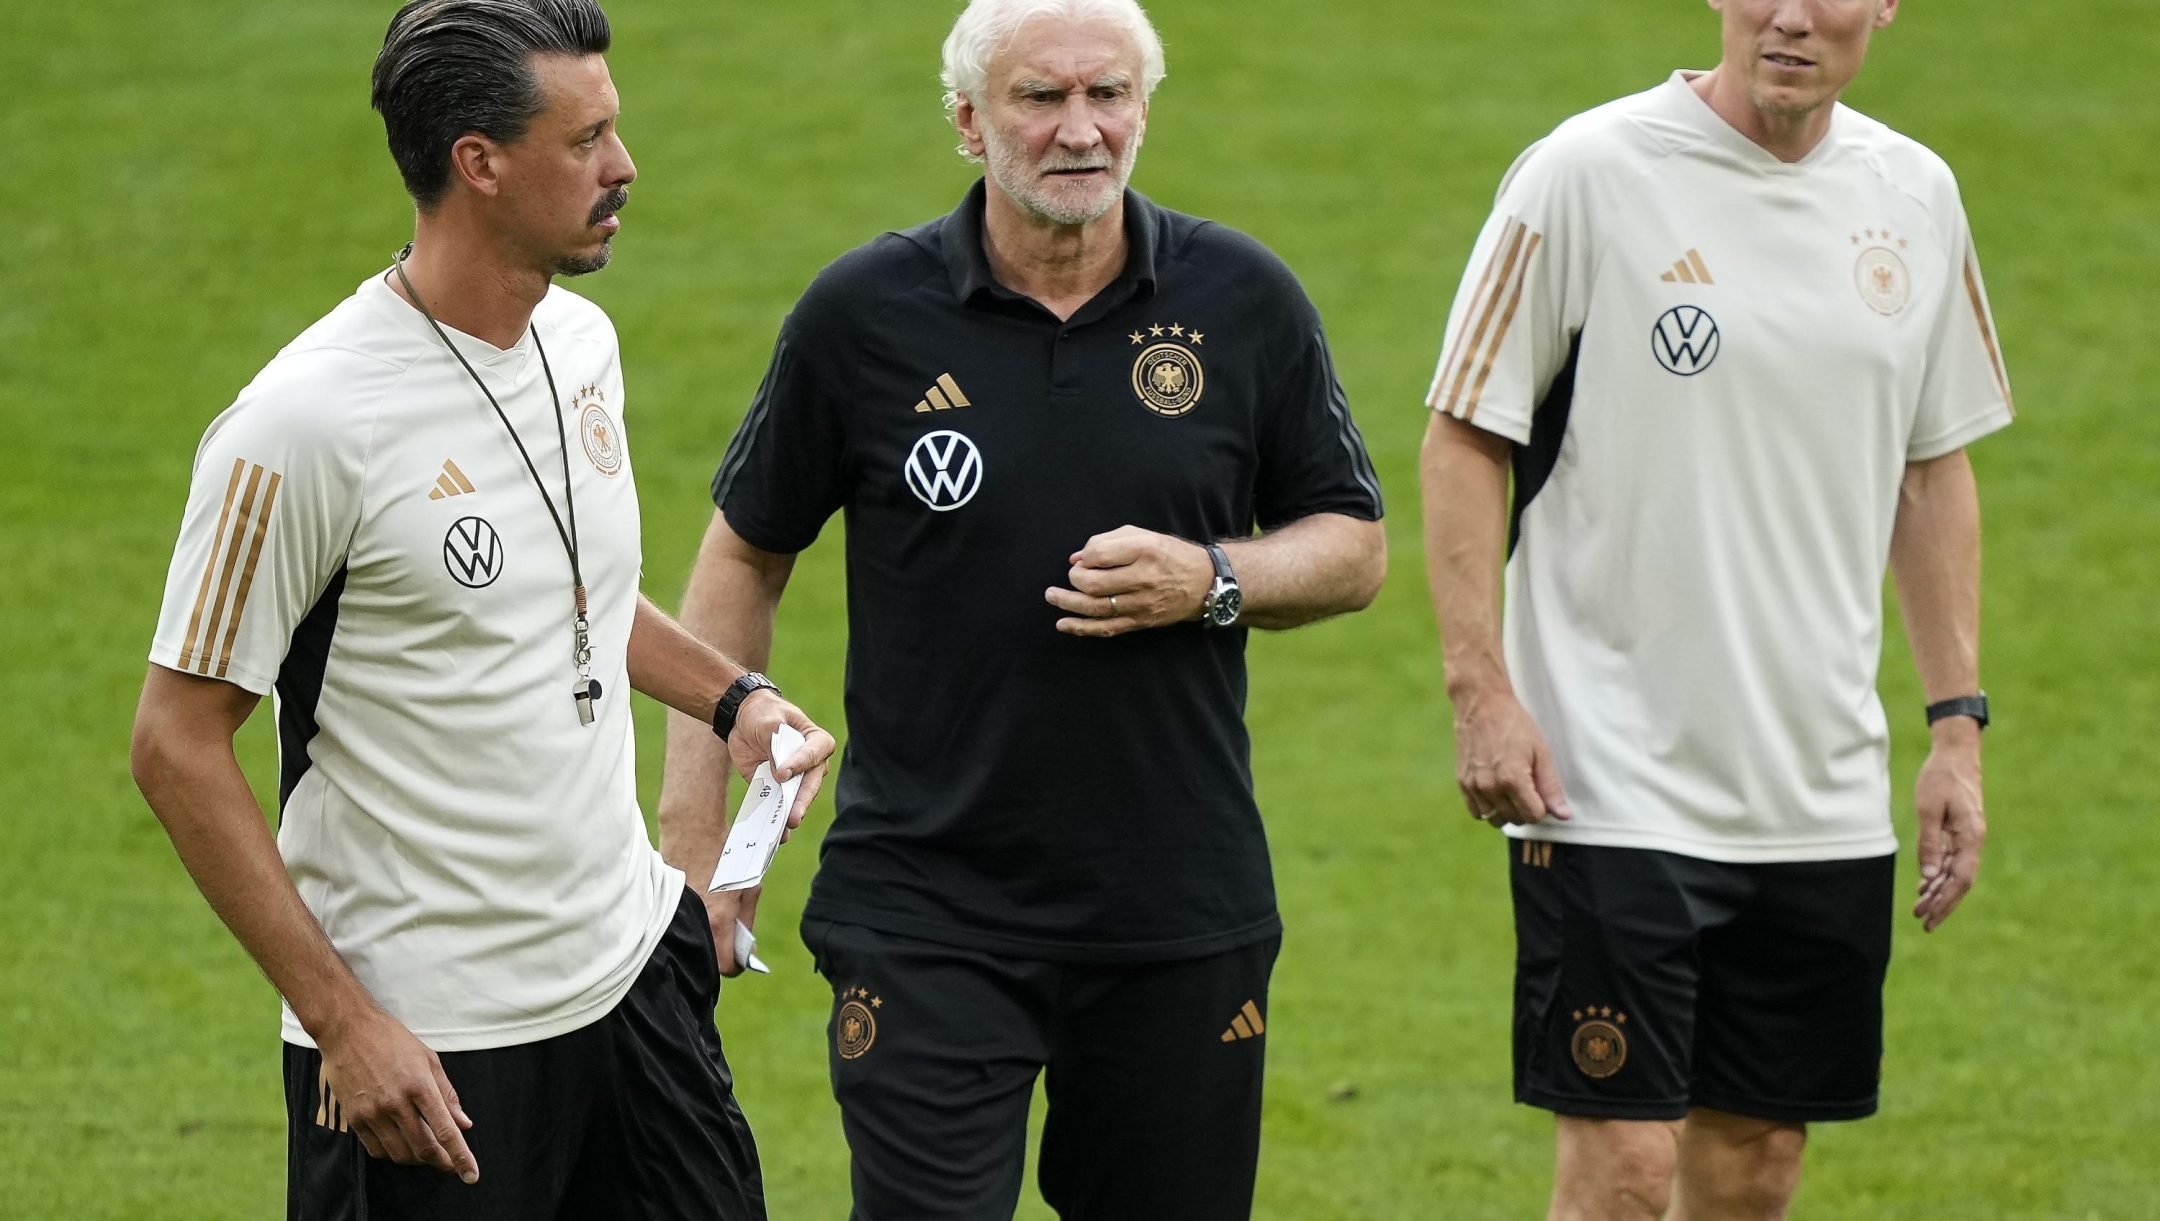 FILE - Germany's then interim coaches Rudi Voeller, center, Hannes Wolf, right, and Sandro Wagner, left, lead the last training session ahead of an international friendly soccer match between Germany and France in Dortmund, Germany, Monday, Sept. 11, 2023. Rudi Völler is set to stay on as sporting director of the German men’s national soccer team through to the 2026 World Cup. (AP Photo/Martin Meissner, File)